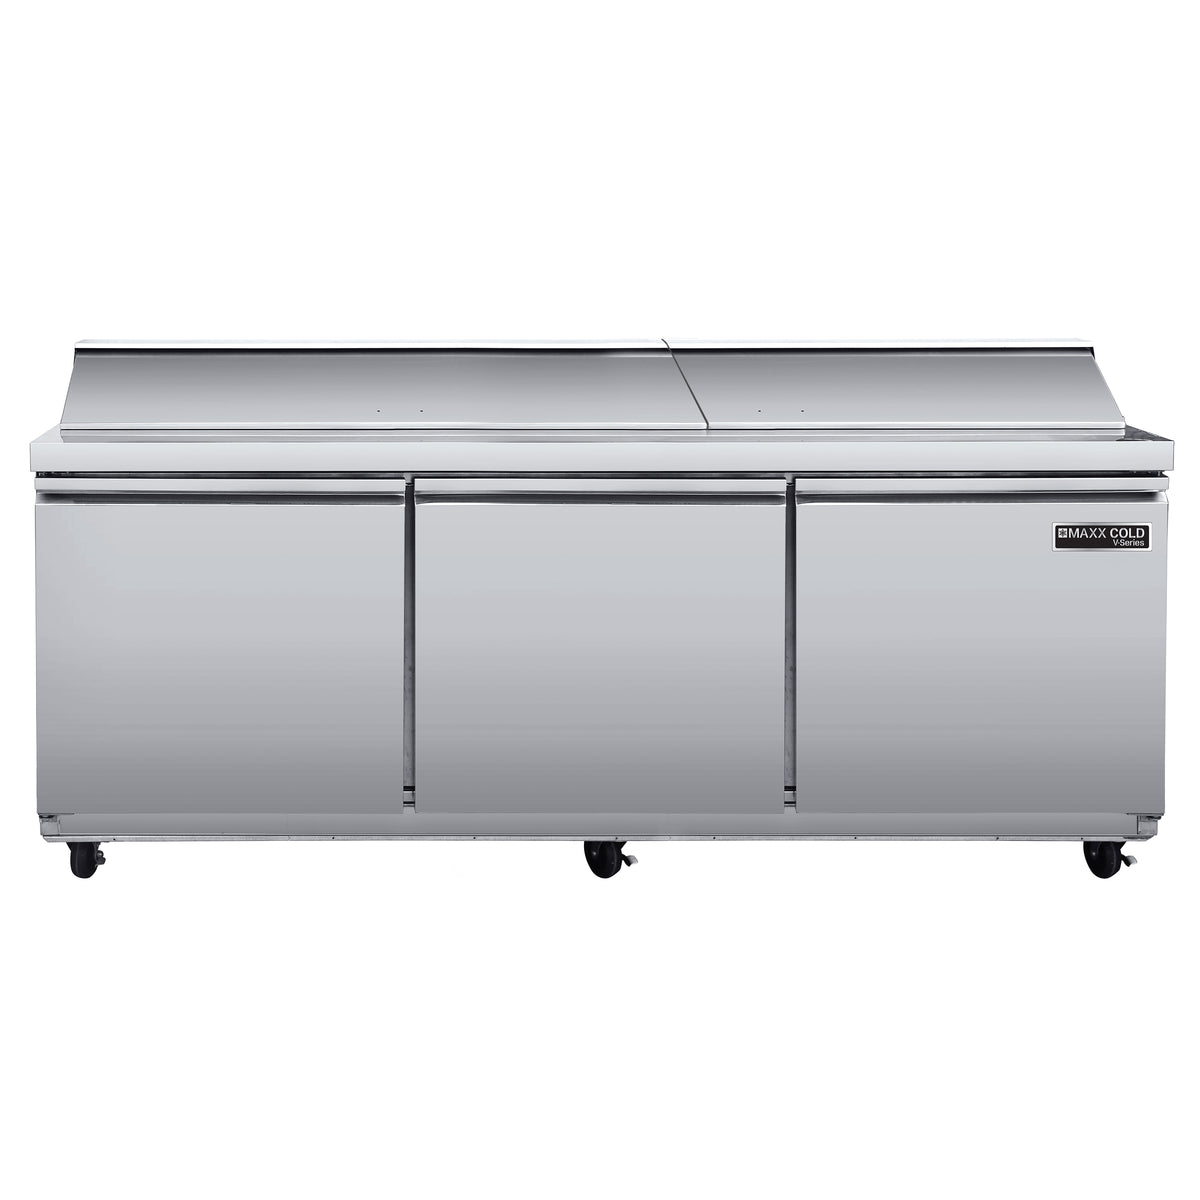 Maxx Cold MVR72MHC V-Series 3 Door Refrigerated Mega Top Prep Table, 72"W, 19.6 cu ft, in Stainless Steel